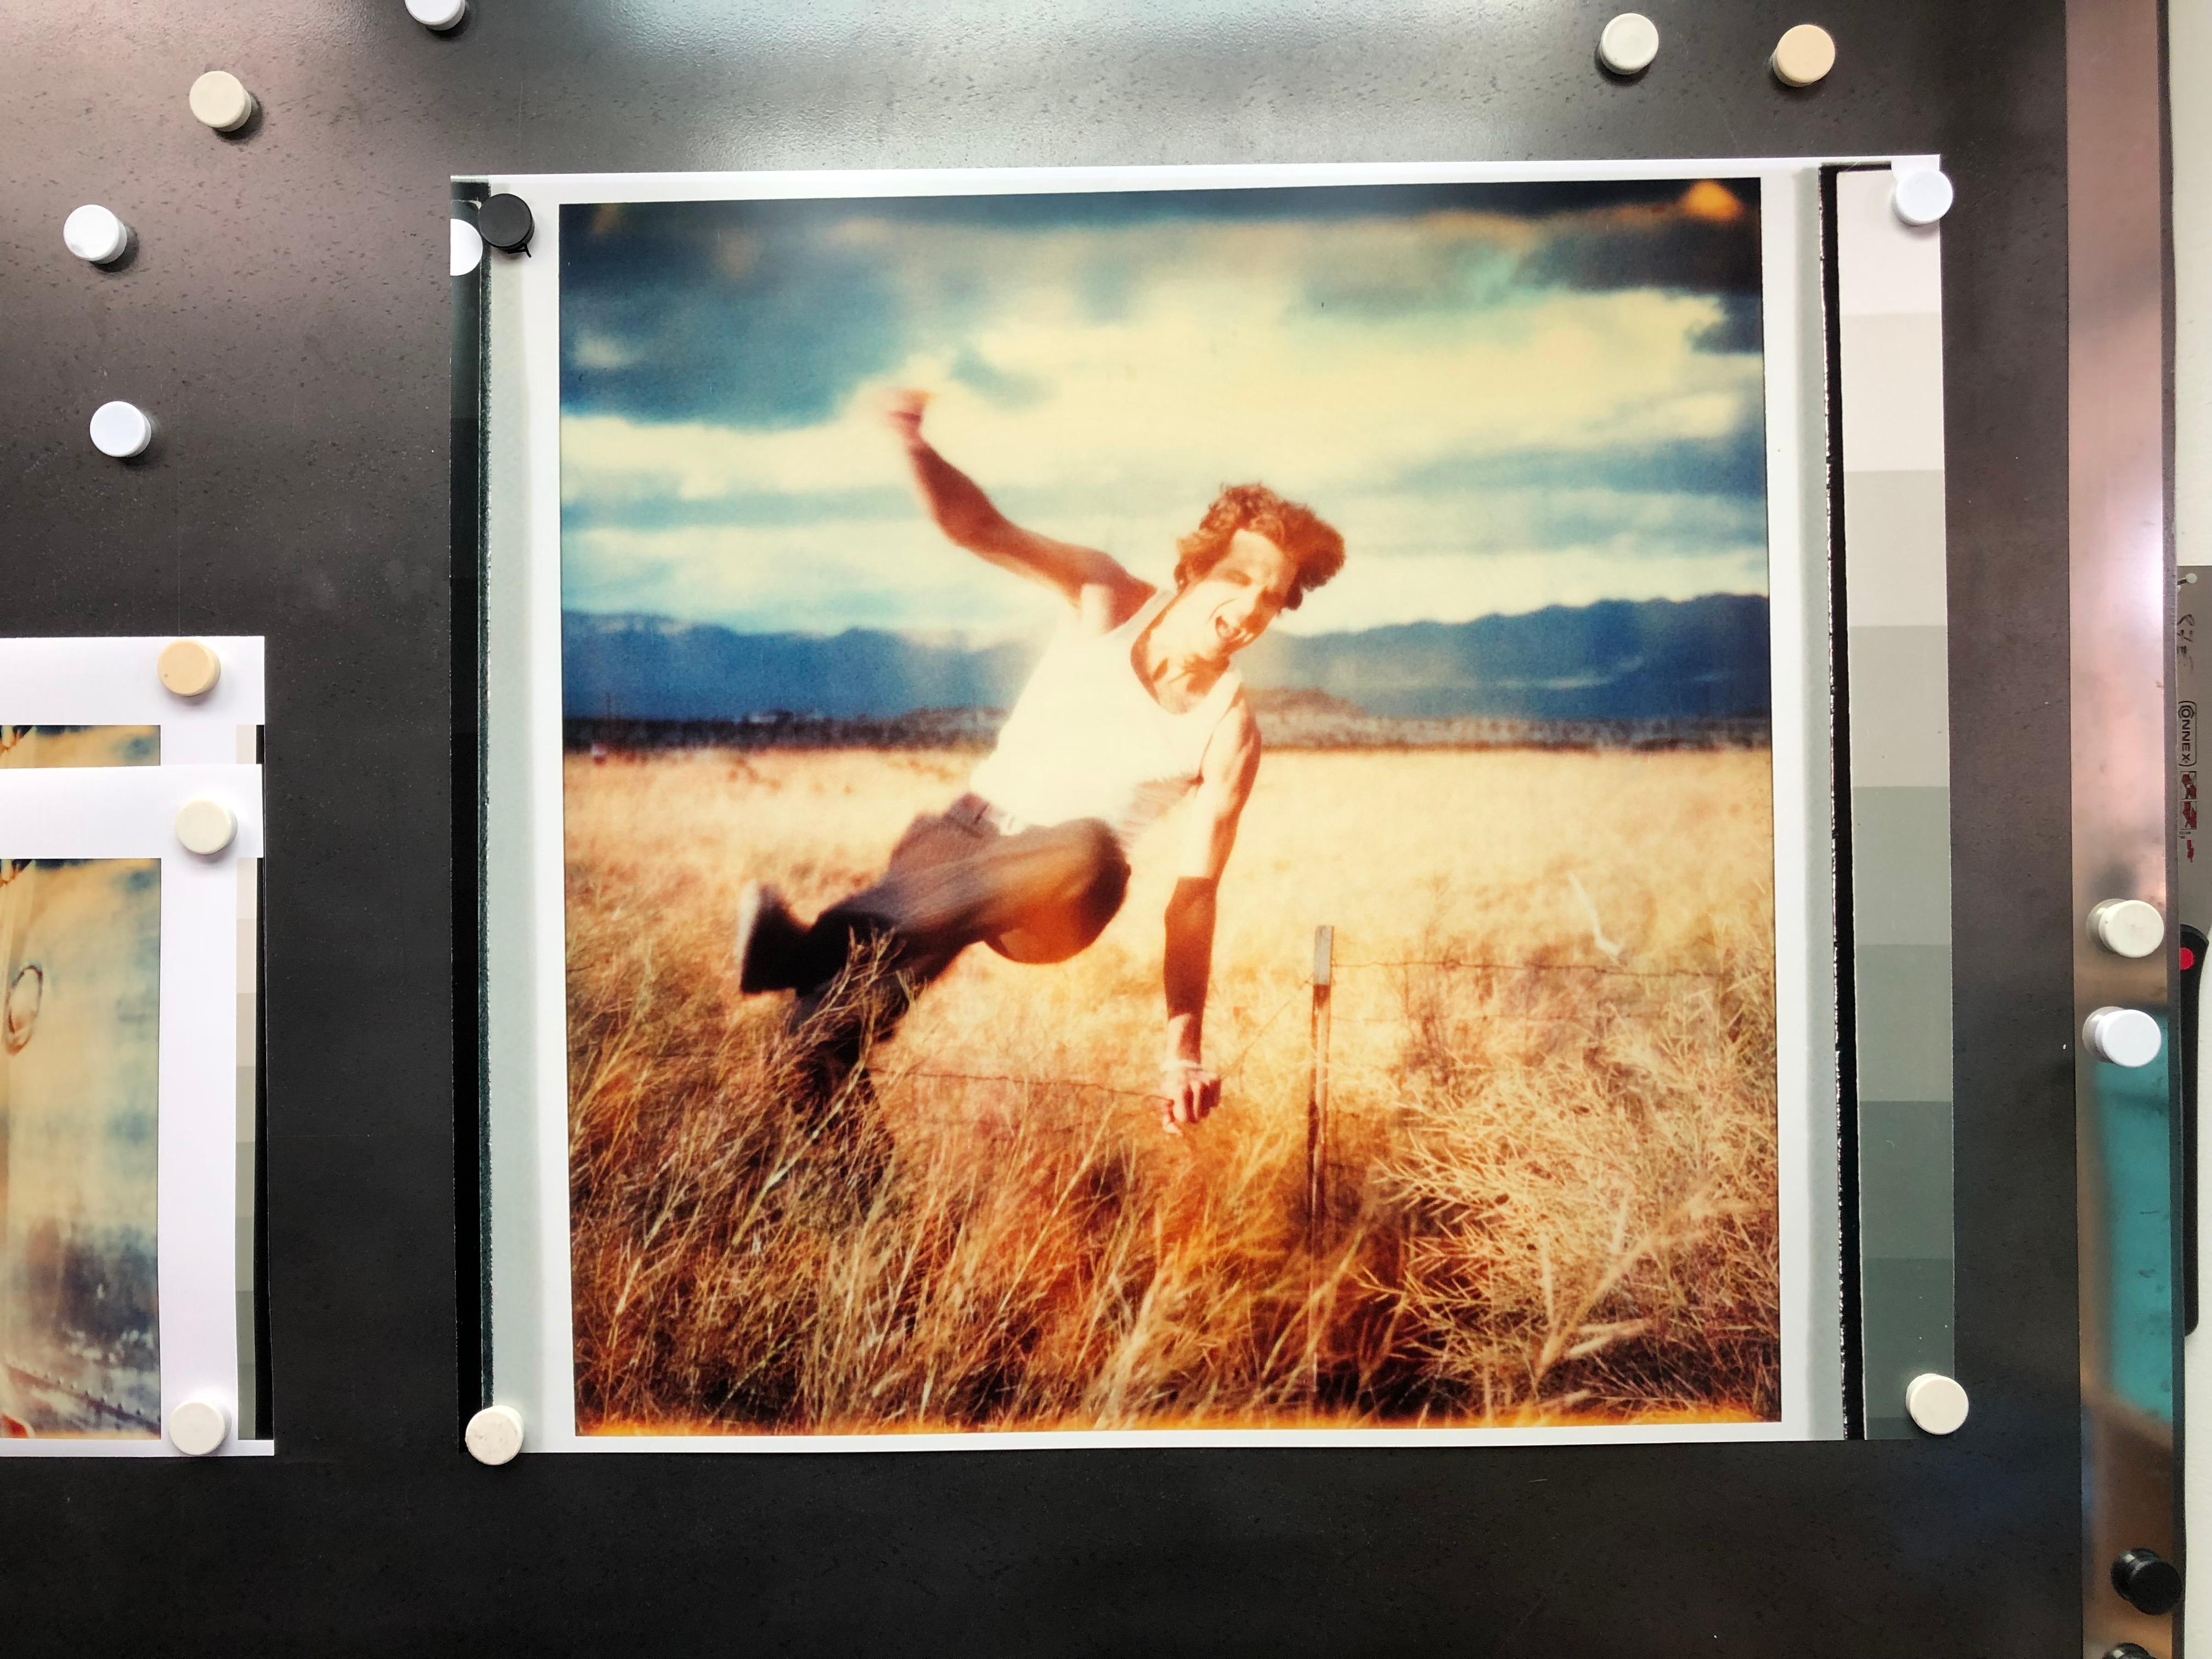 Field of Dreams (Sidewinder) 80 x 78 cm, 2005,
Edition 2/5, analog C-Print, hand-printed by the artist, based on a Polaroid, 
Artist Inventory 3131.02, not mounted

Stefanie Schneider's scintillating situations take place in the American West.